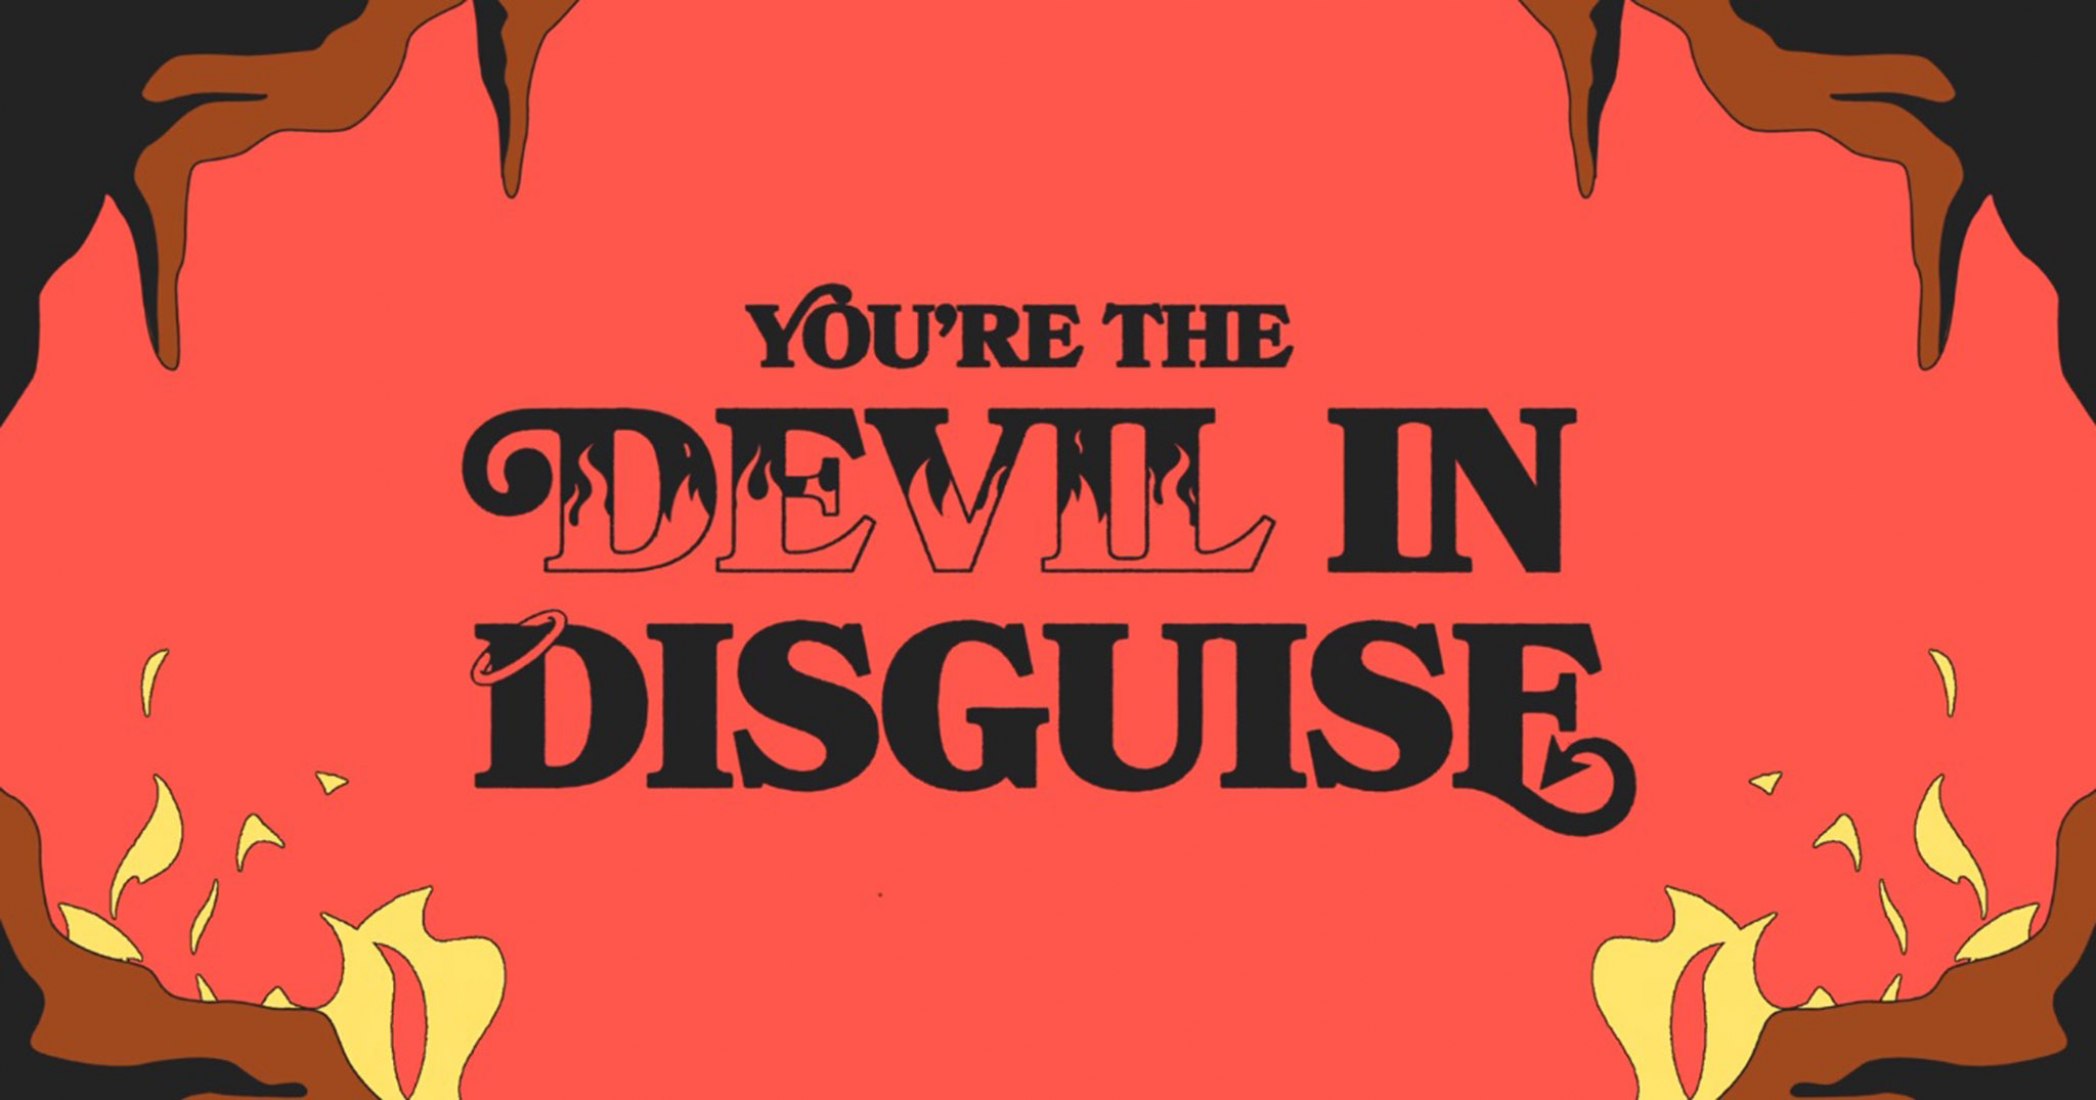 (You’re The) Devil In Disguise by Elvis Presley